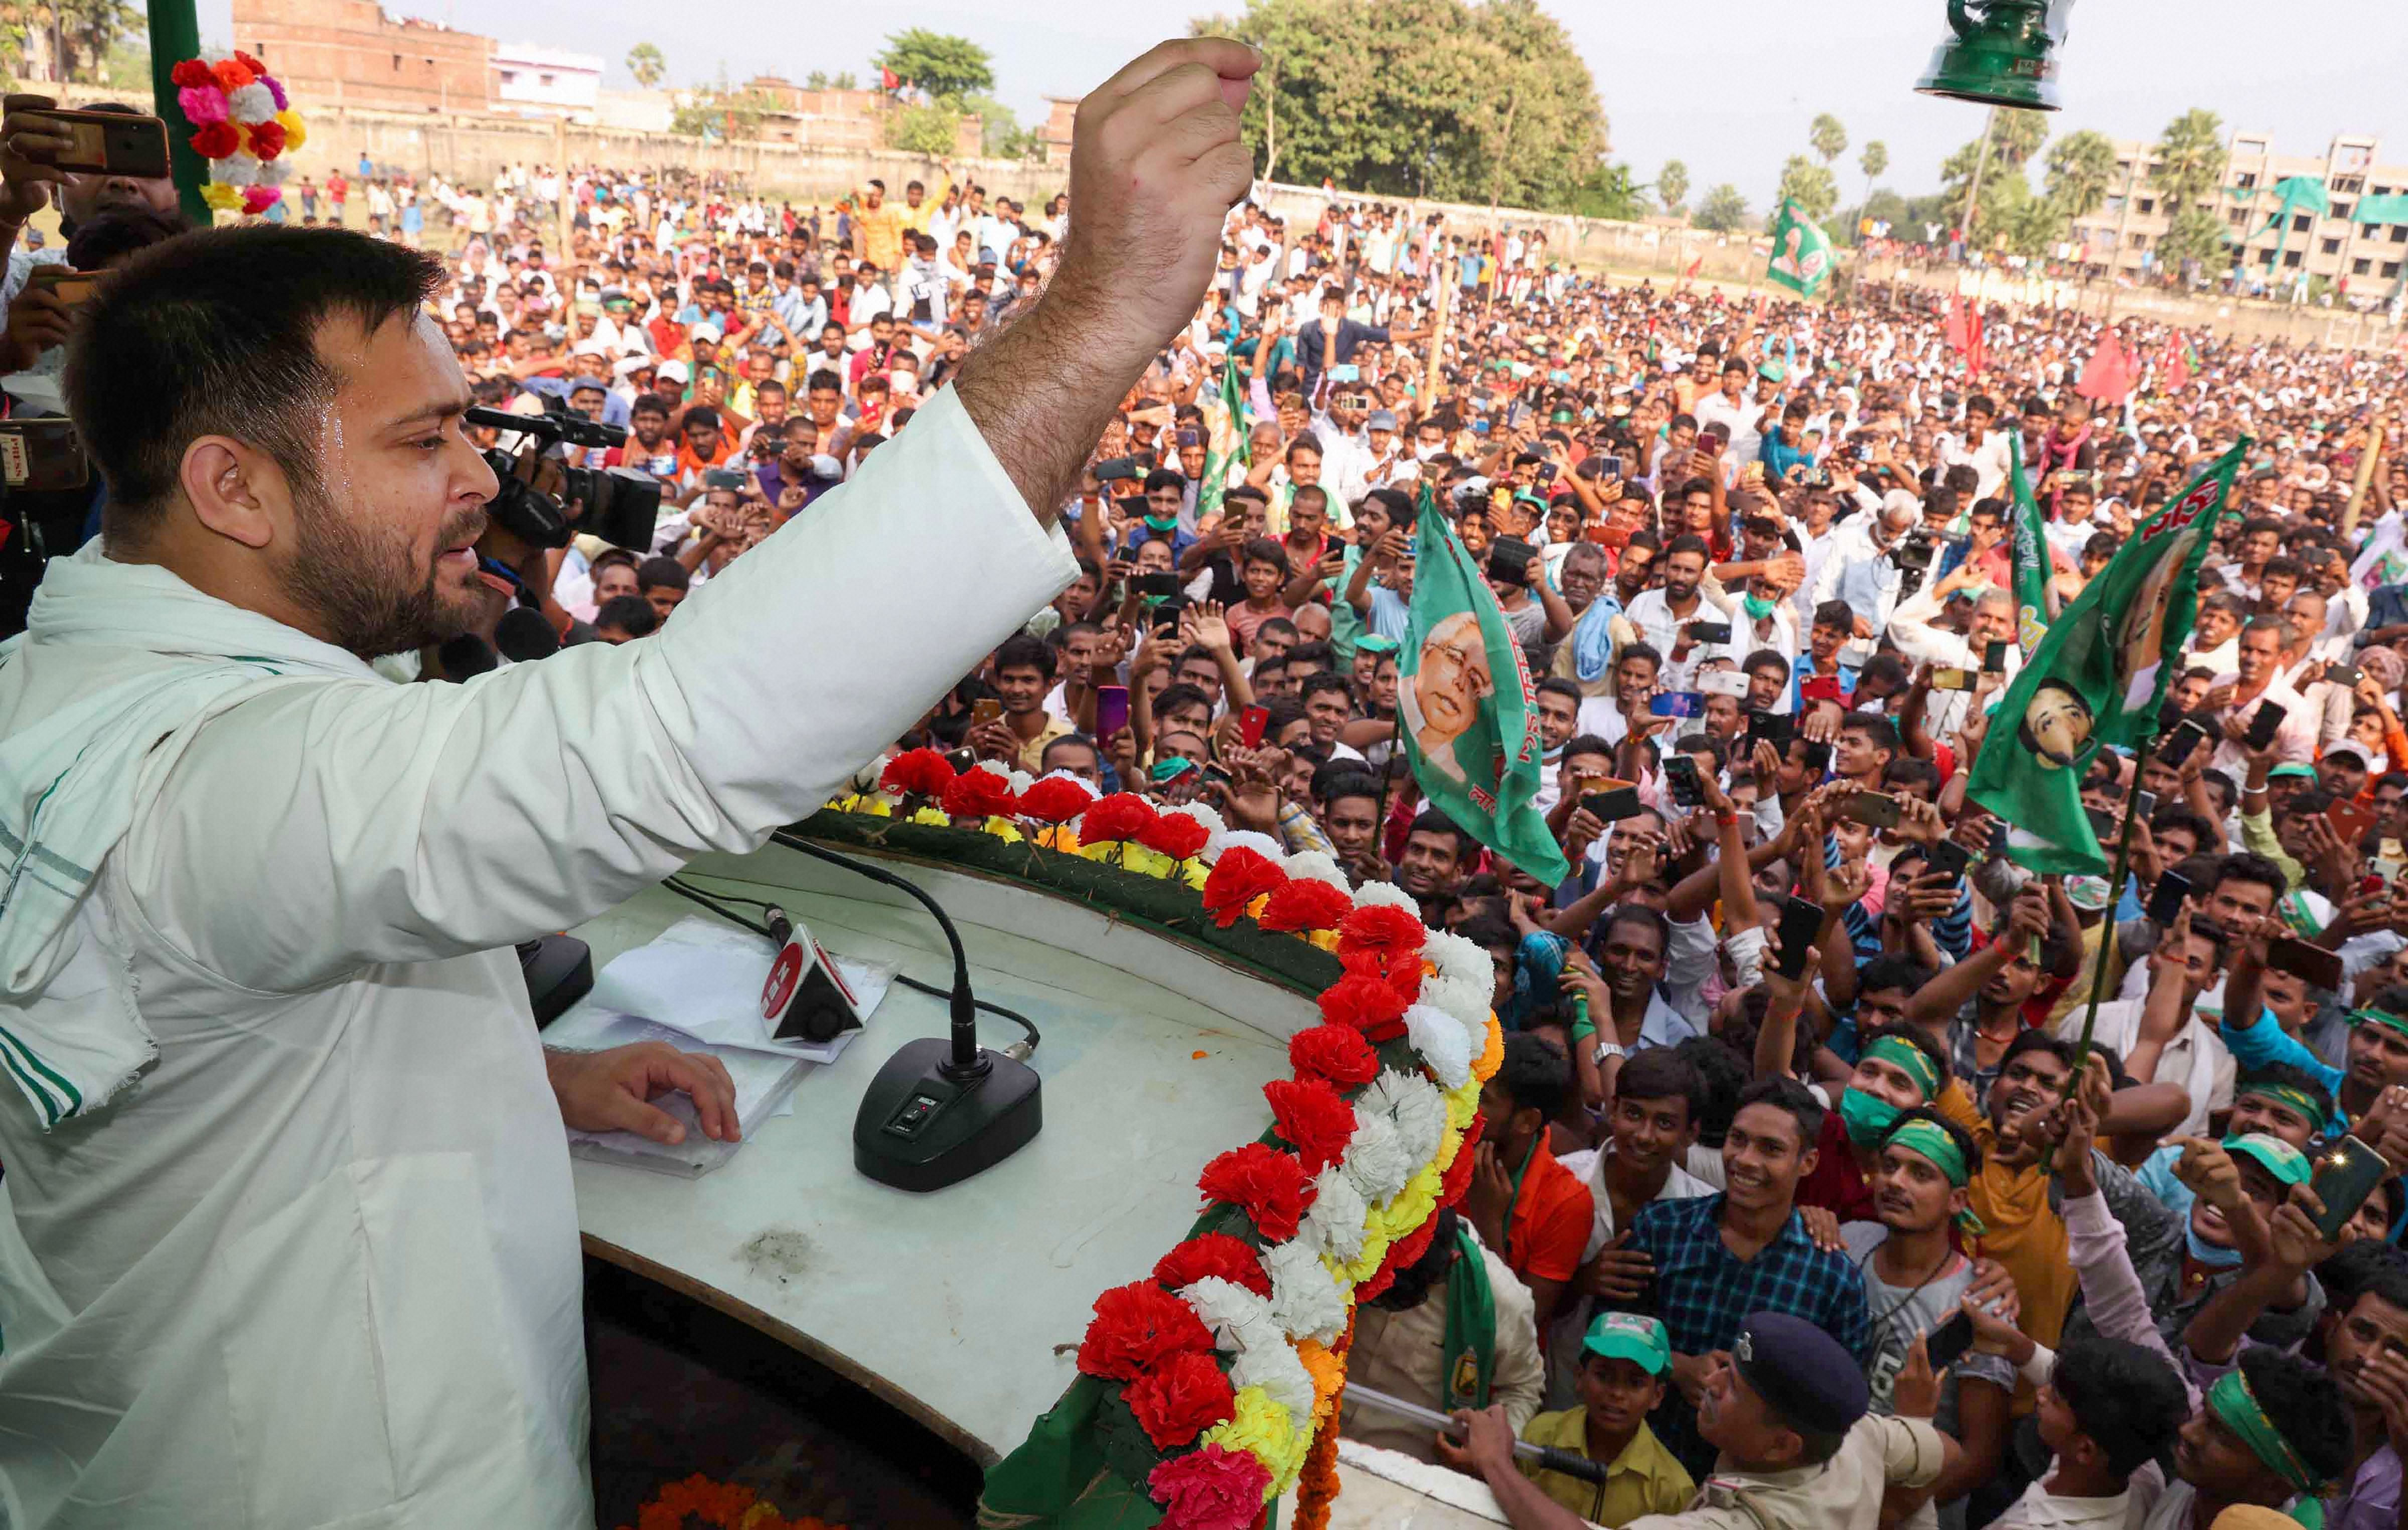 RJD leader Tejashwi Prasad Yadav addresses a gathering during an election rally for the upcoming Bihar assembly elections. Credit: PTI Photo